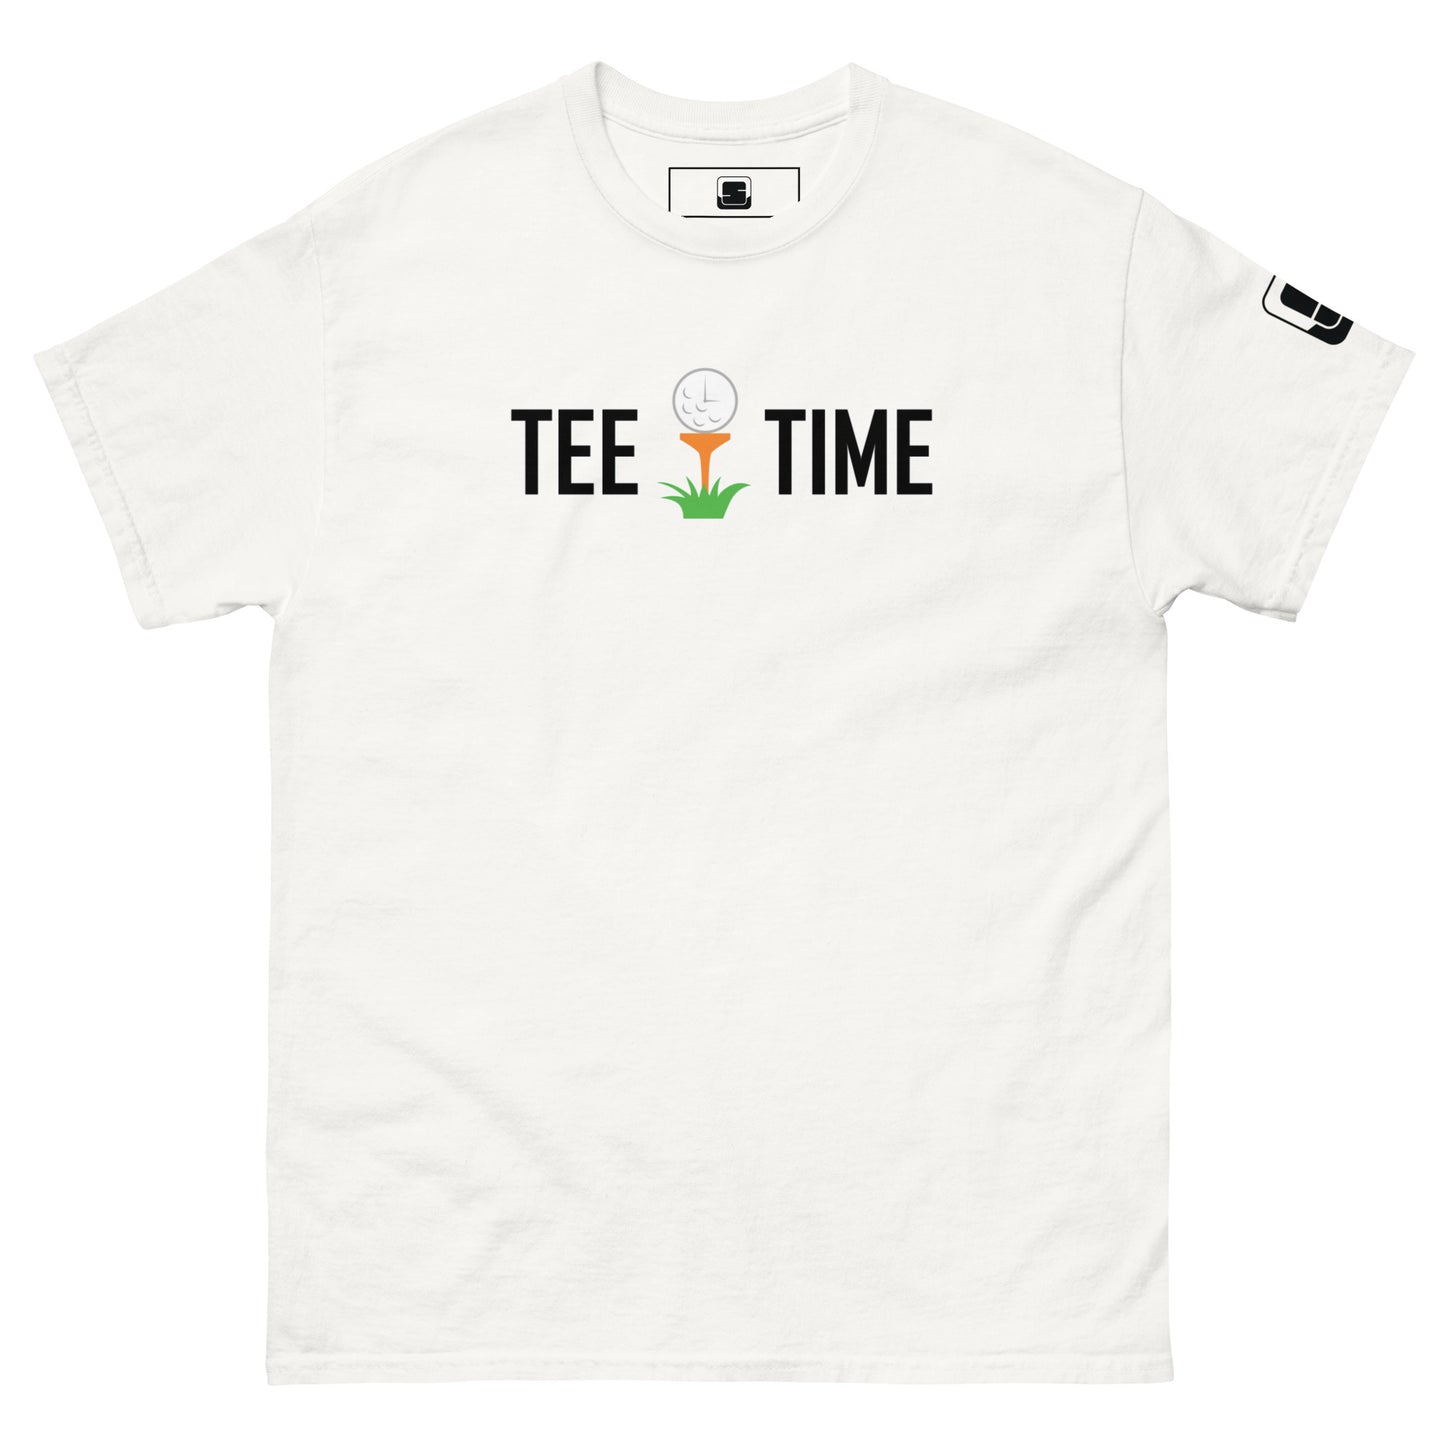 The image displays a plain white t-shirt laid flat and centered. On the chest area is printed "TEE TIME" in bold black letters, with a graphic of a golf ball on a tee and a small green tuft of grass below it. The t-shirt has a black square logo on the right sleeve. The background is a clean, solid white, ensuring the focus remains on the t-shirt's graphic and design.